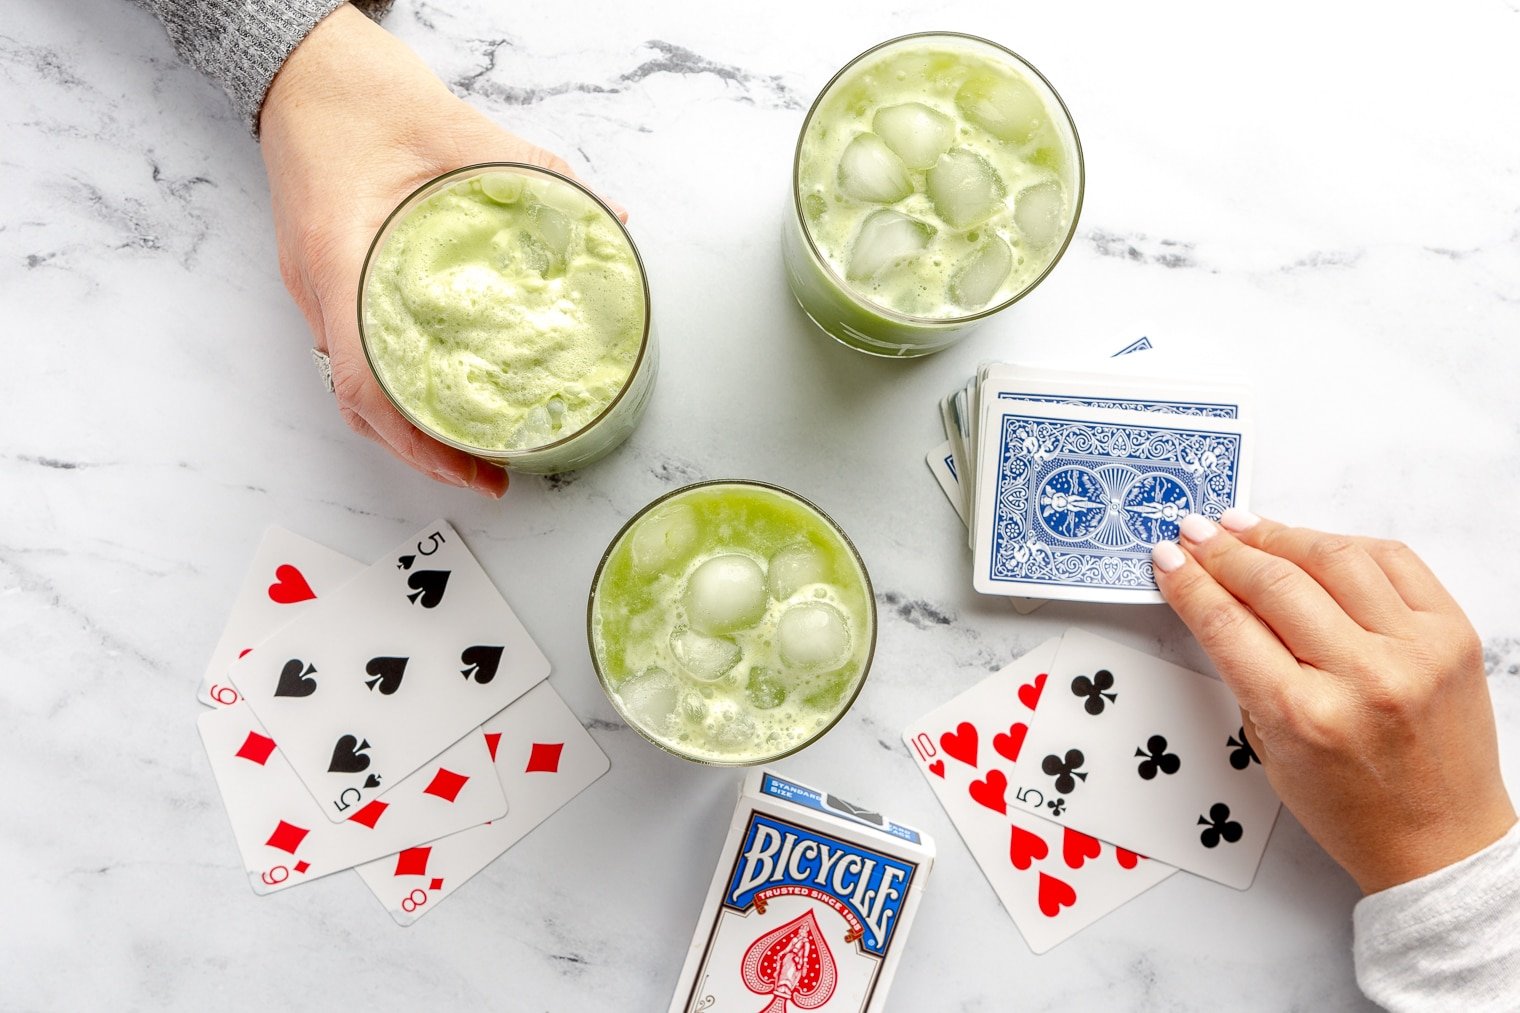 There are three glasses of green matcha iced tea on a white and black marble surface along with a deck of playing cards. There is a hand holding a glass of matcha tea and a hand drawing a card from the top of the deck.